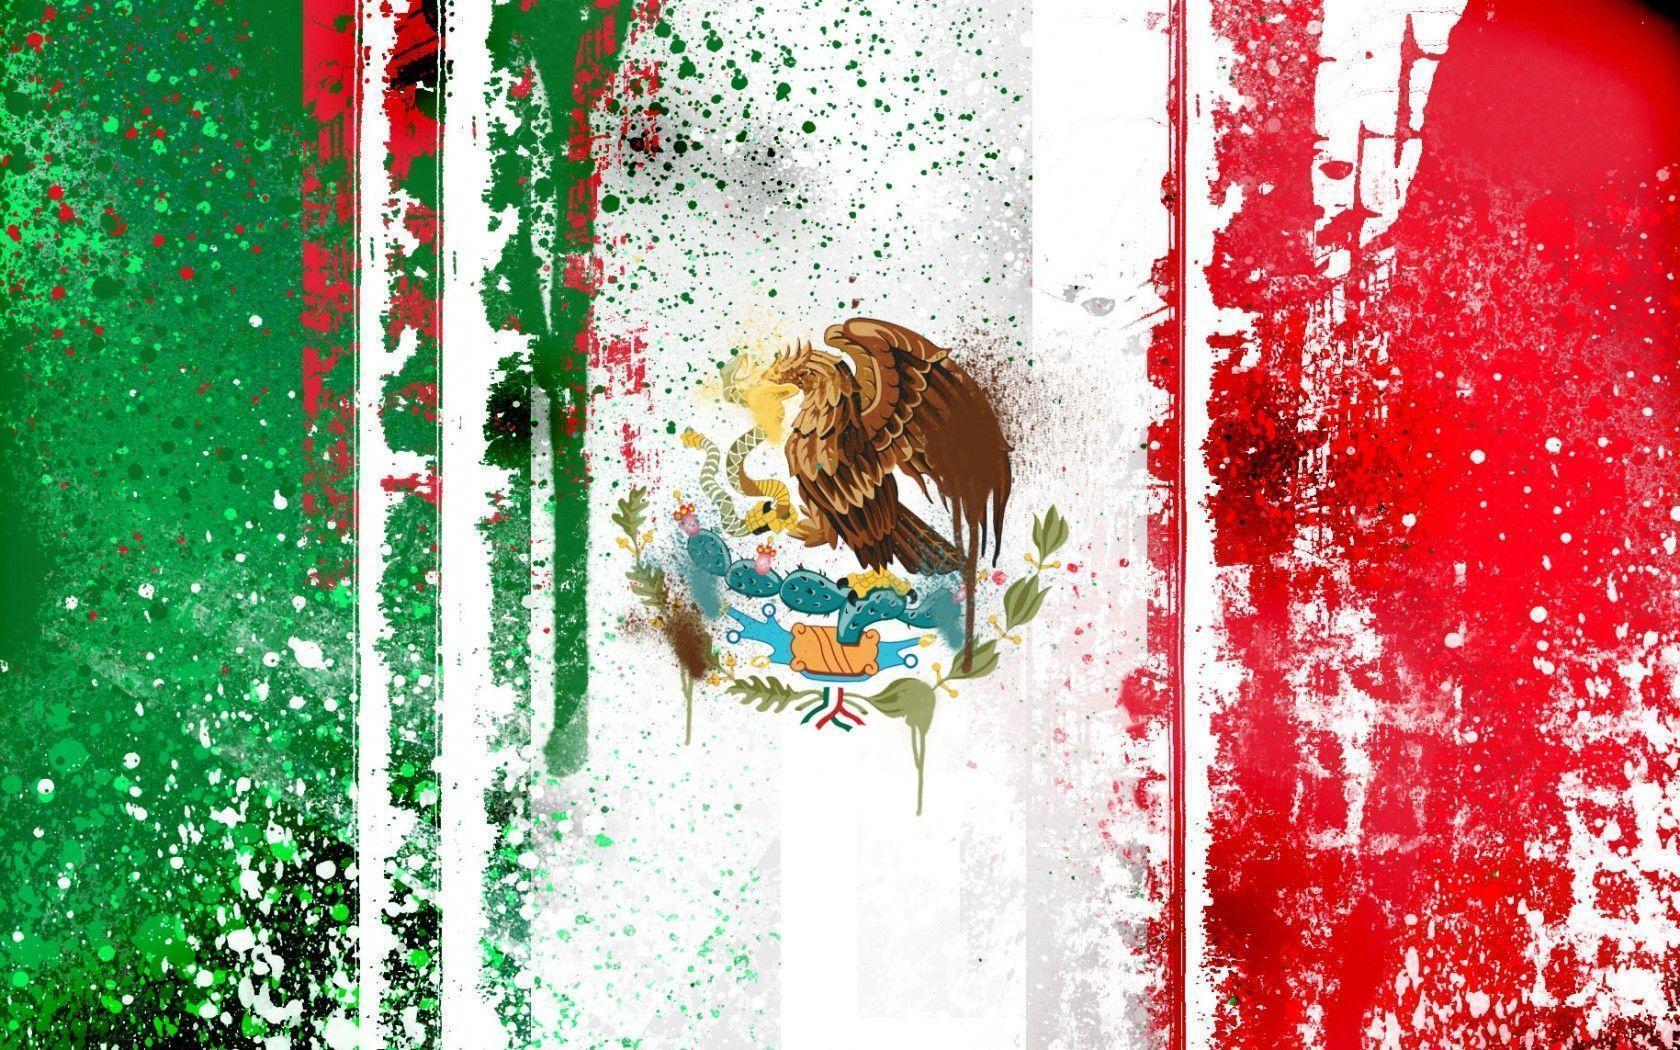 Mexican Flag Abstract Painting Wallpaper Wide or HD. Artistic